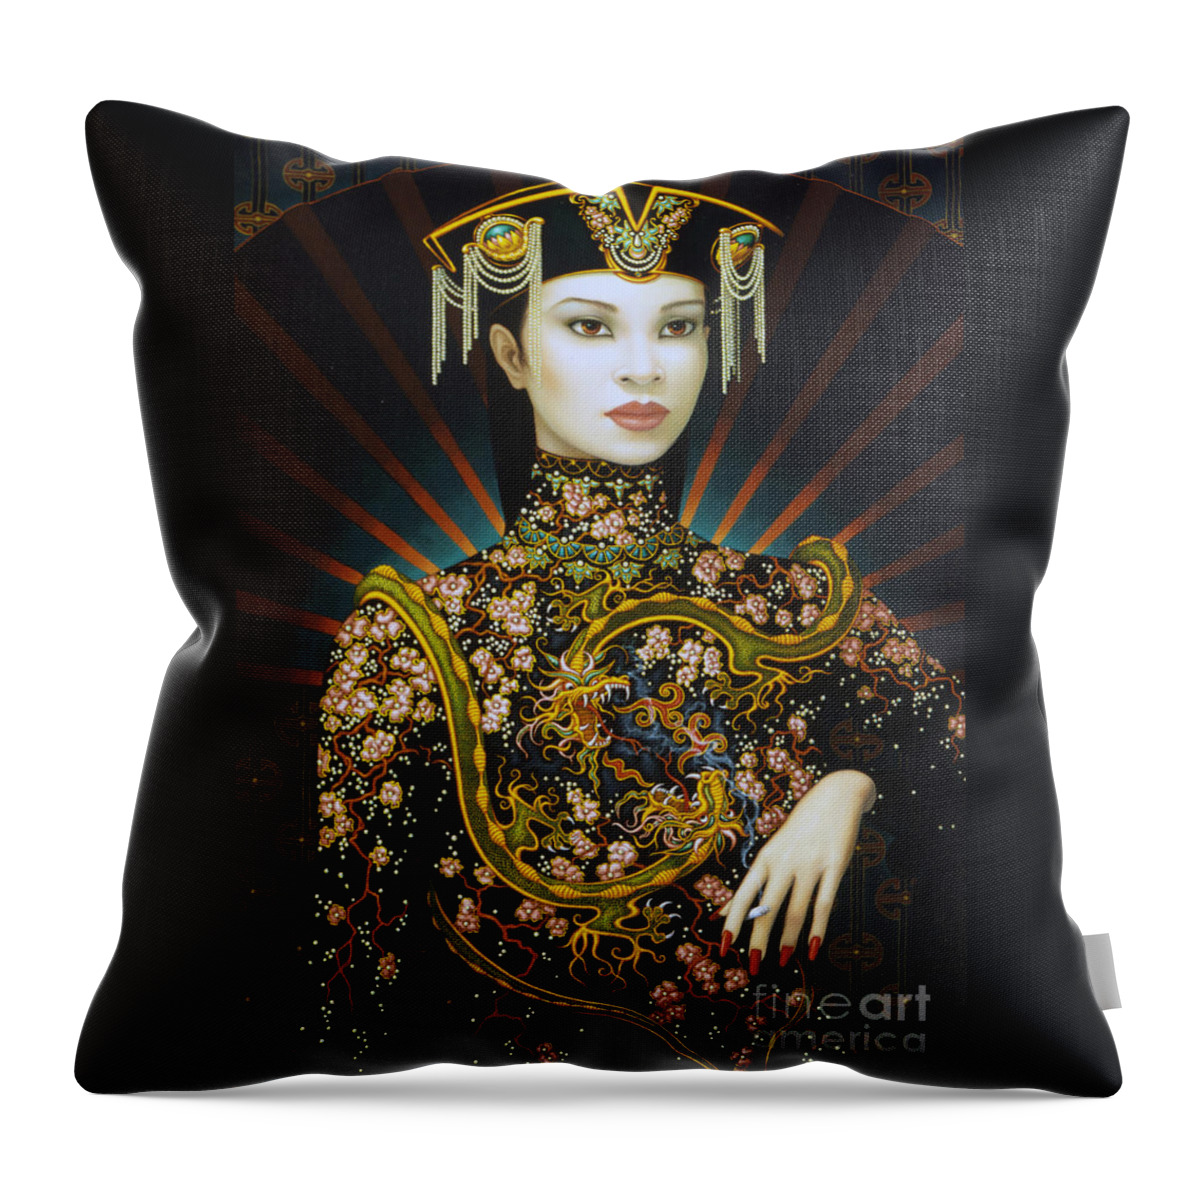 Oriental Throw Pillow featuring the painting Dragon Smoke by Jane Whiting Chrzanoska